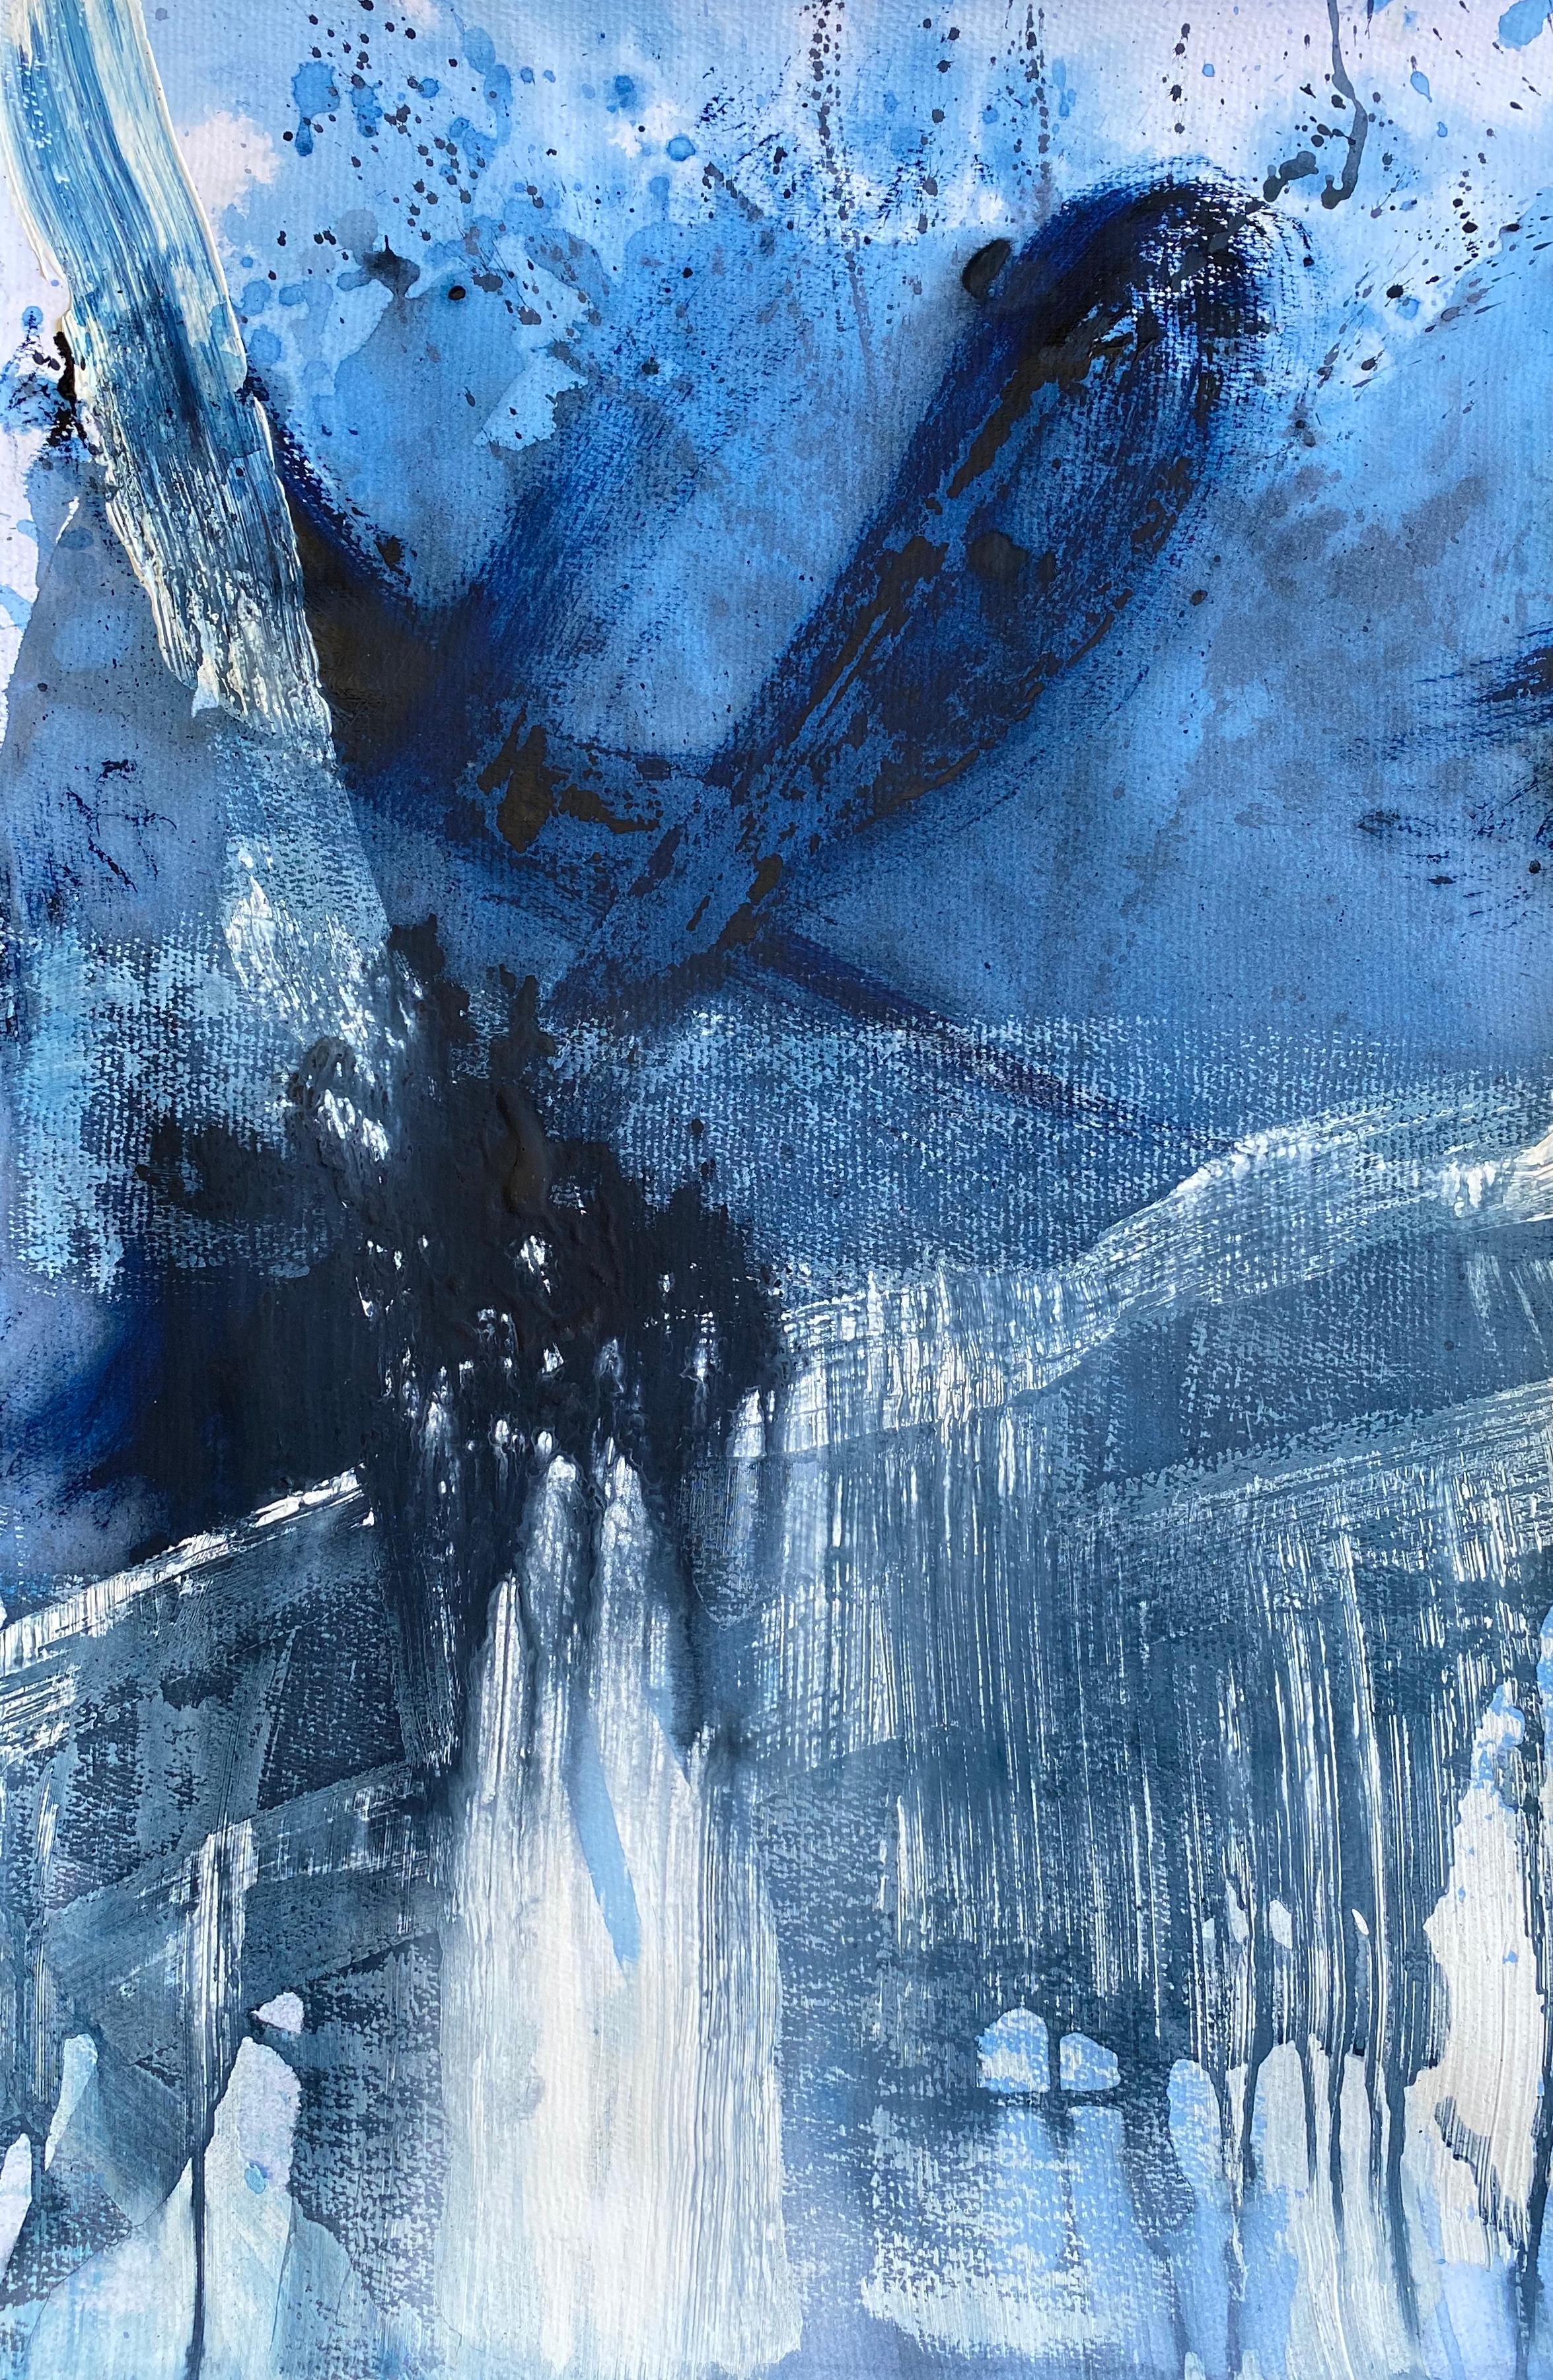 Abstract Blue and White no3 original abstract expressionist painting on paper